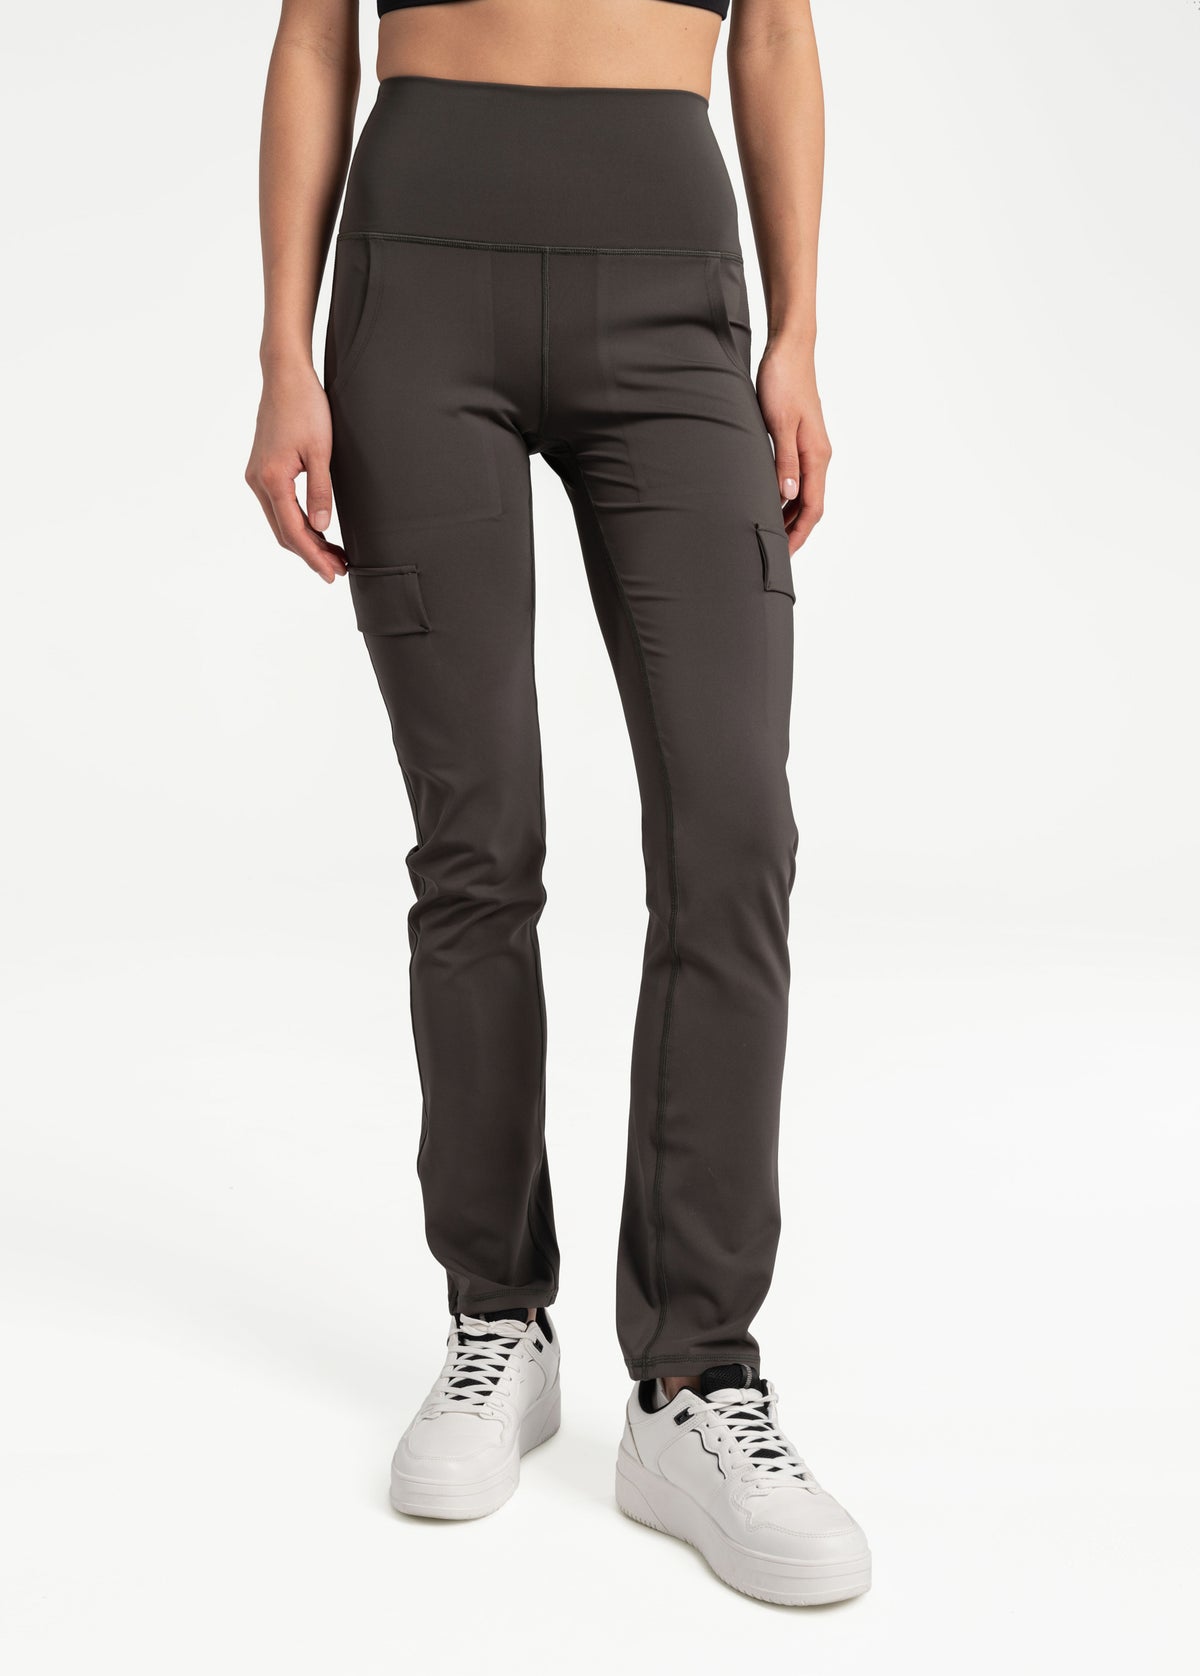 One Step Up Cargo Pant - Black